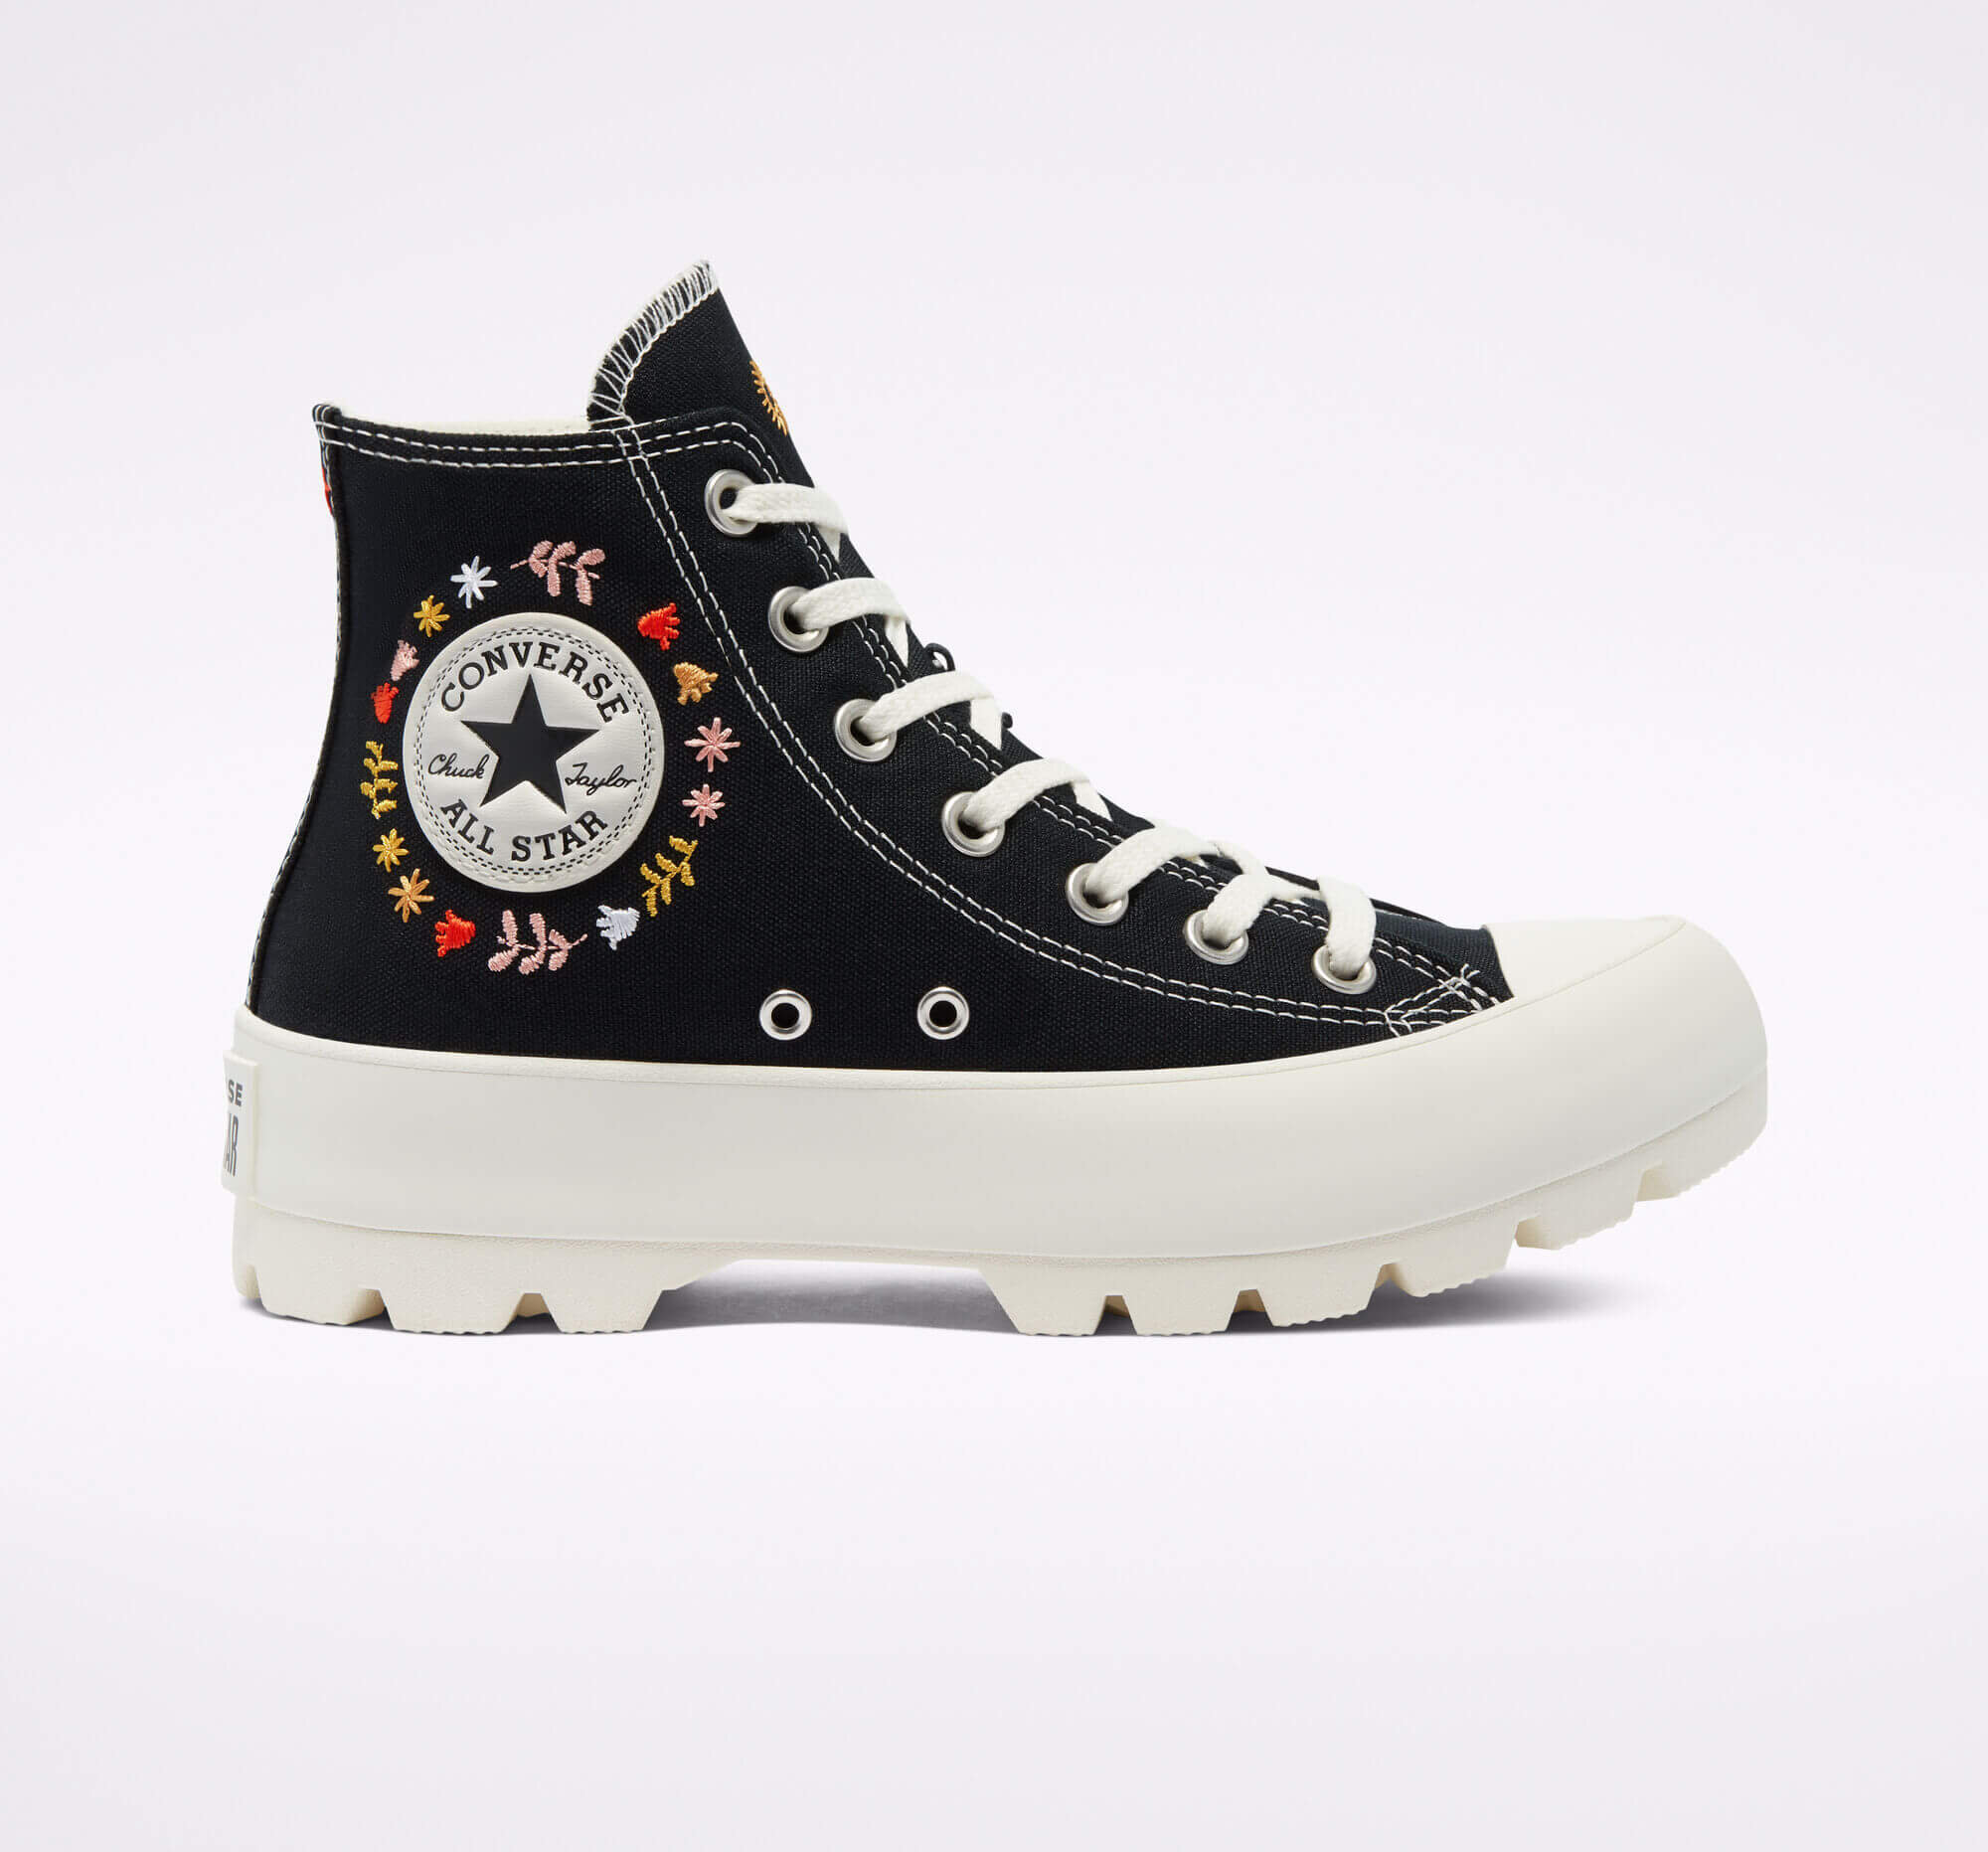 CNK-Converse-My-Story-Collection-Its-Okay-To-Wander-Lugged-1.jpg